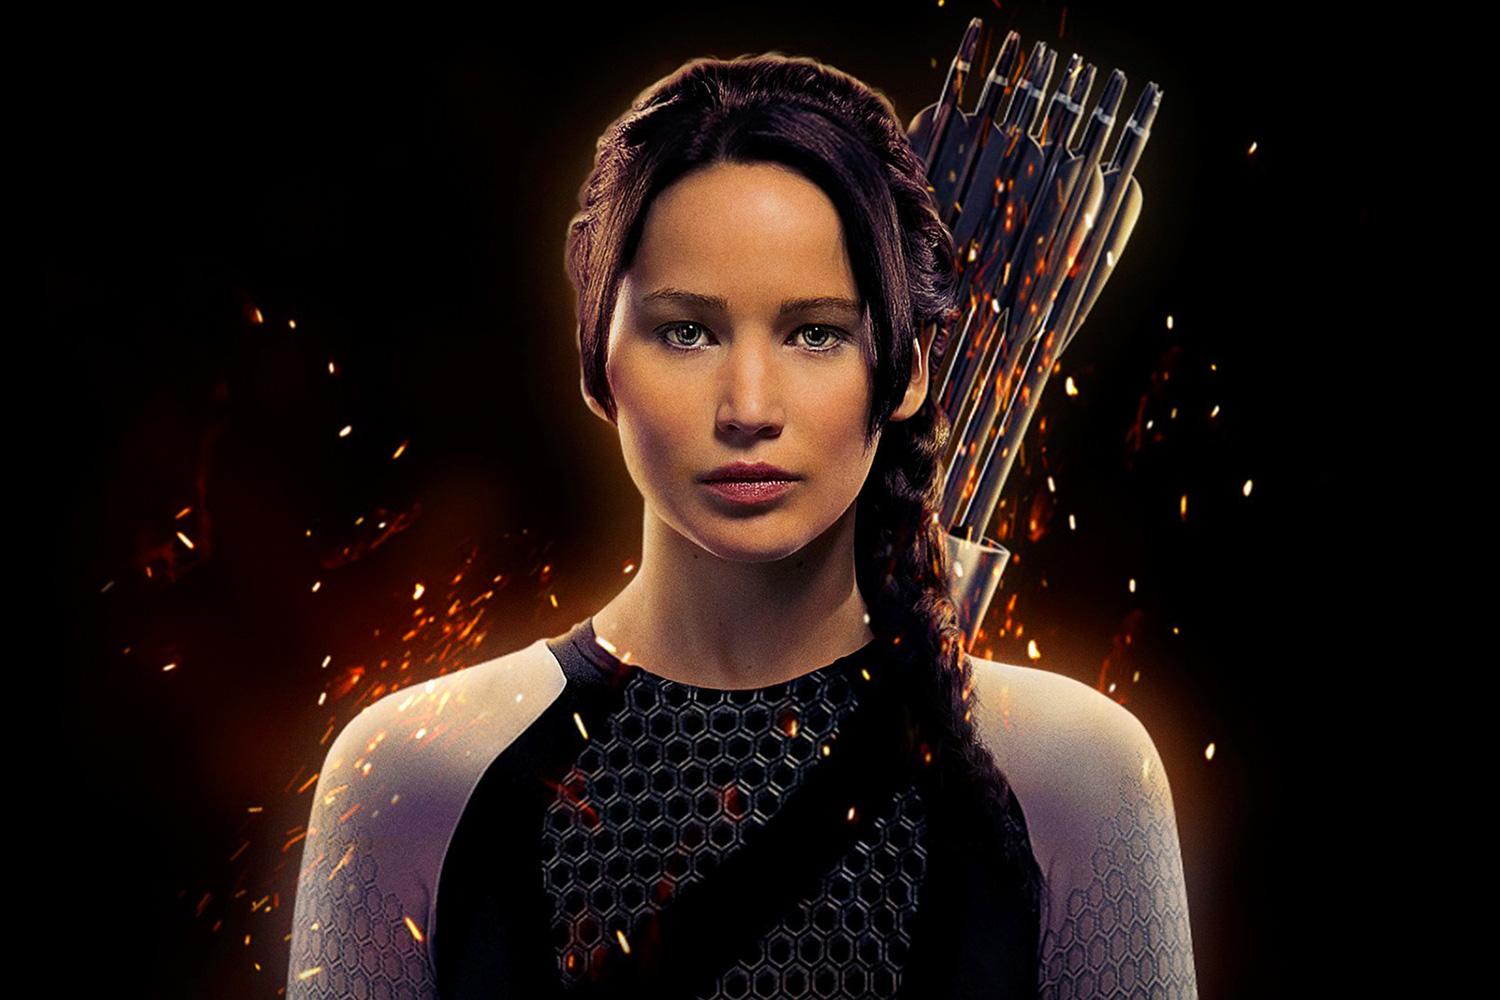 The Hunger Games: Catching Fire' Review: New Director Sparks Sequel